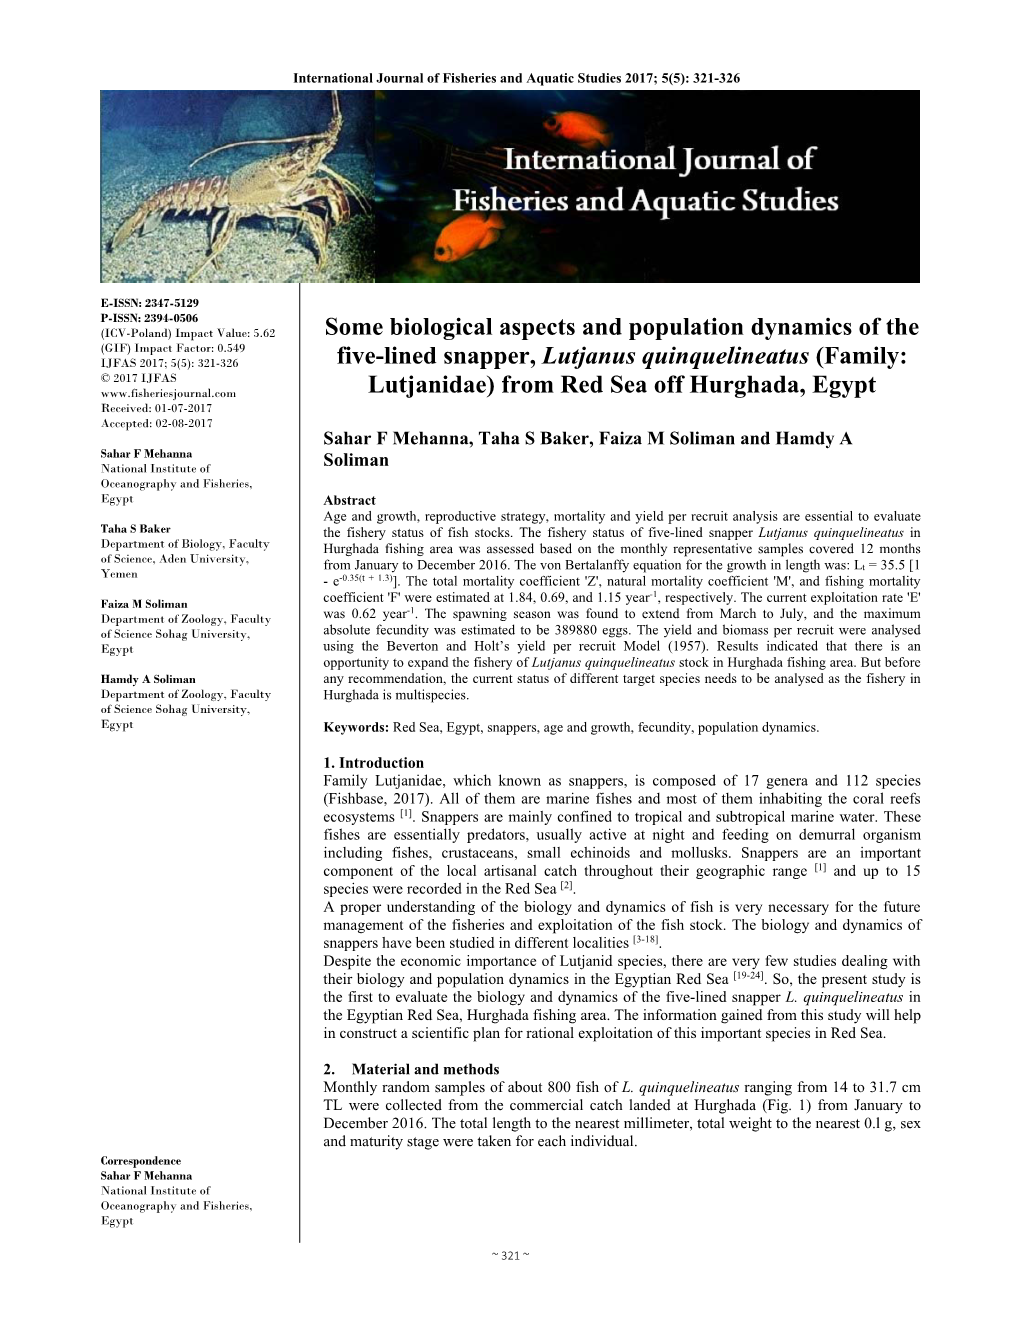 Some Biological Aspects and Population Dynamics of the Five-Lined Snapper, Lutjanus Quinquelineatus (Family: Lutjanidae) from Re